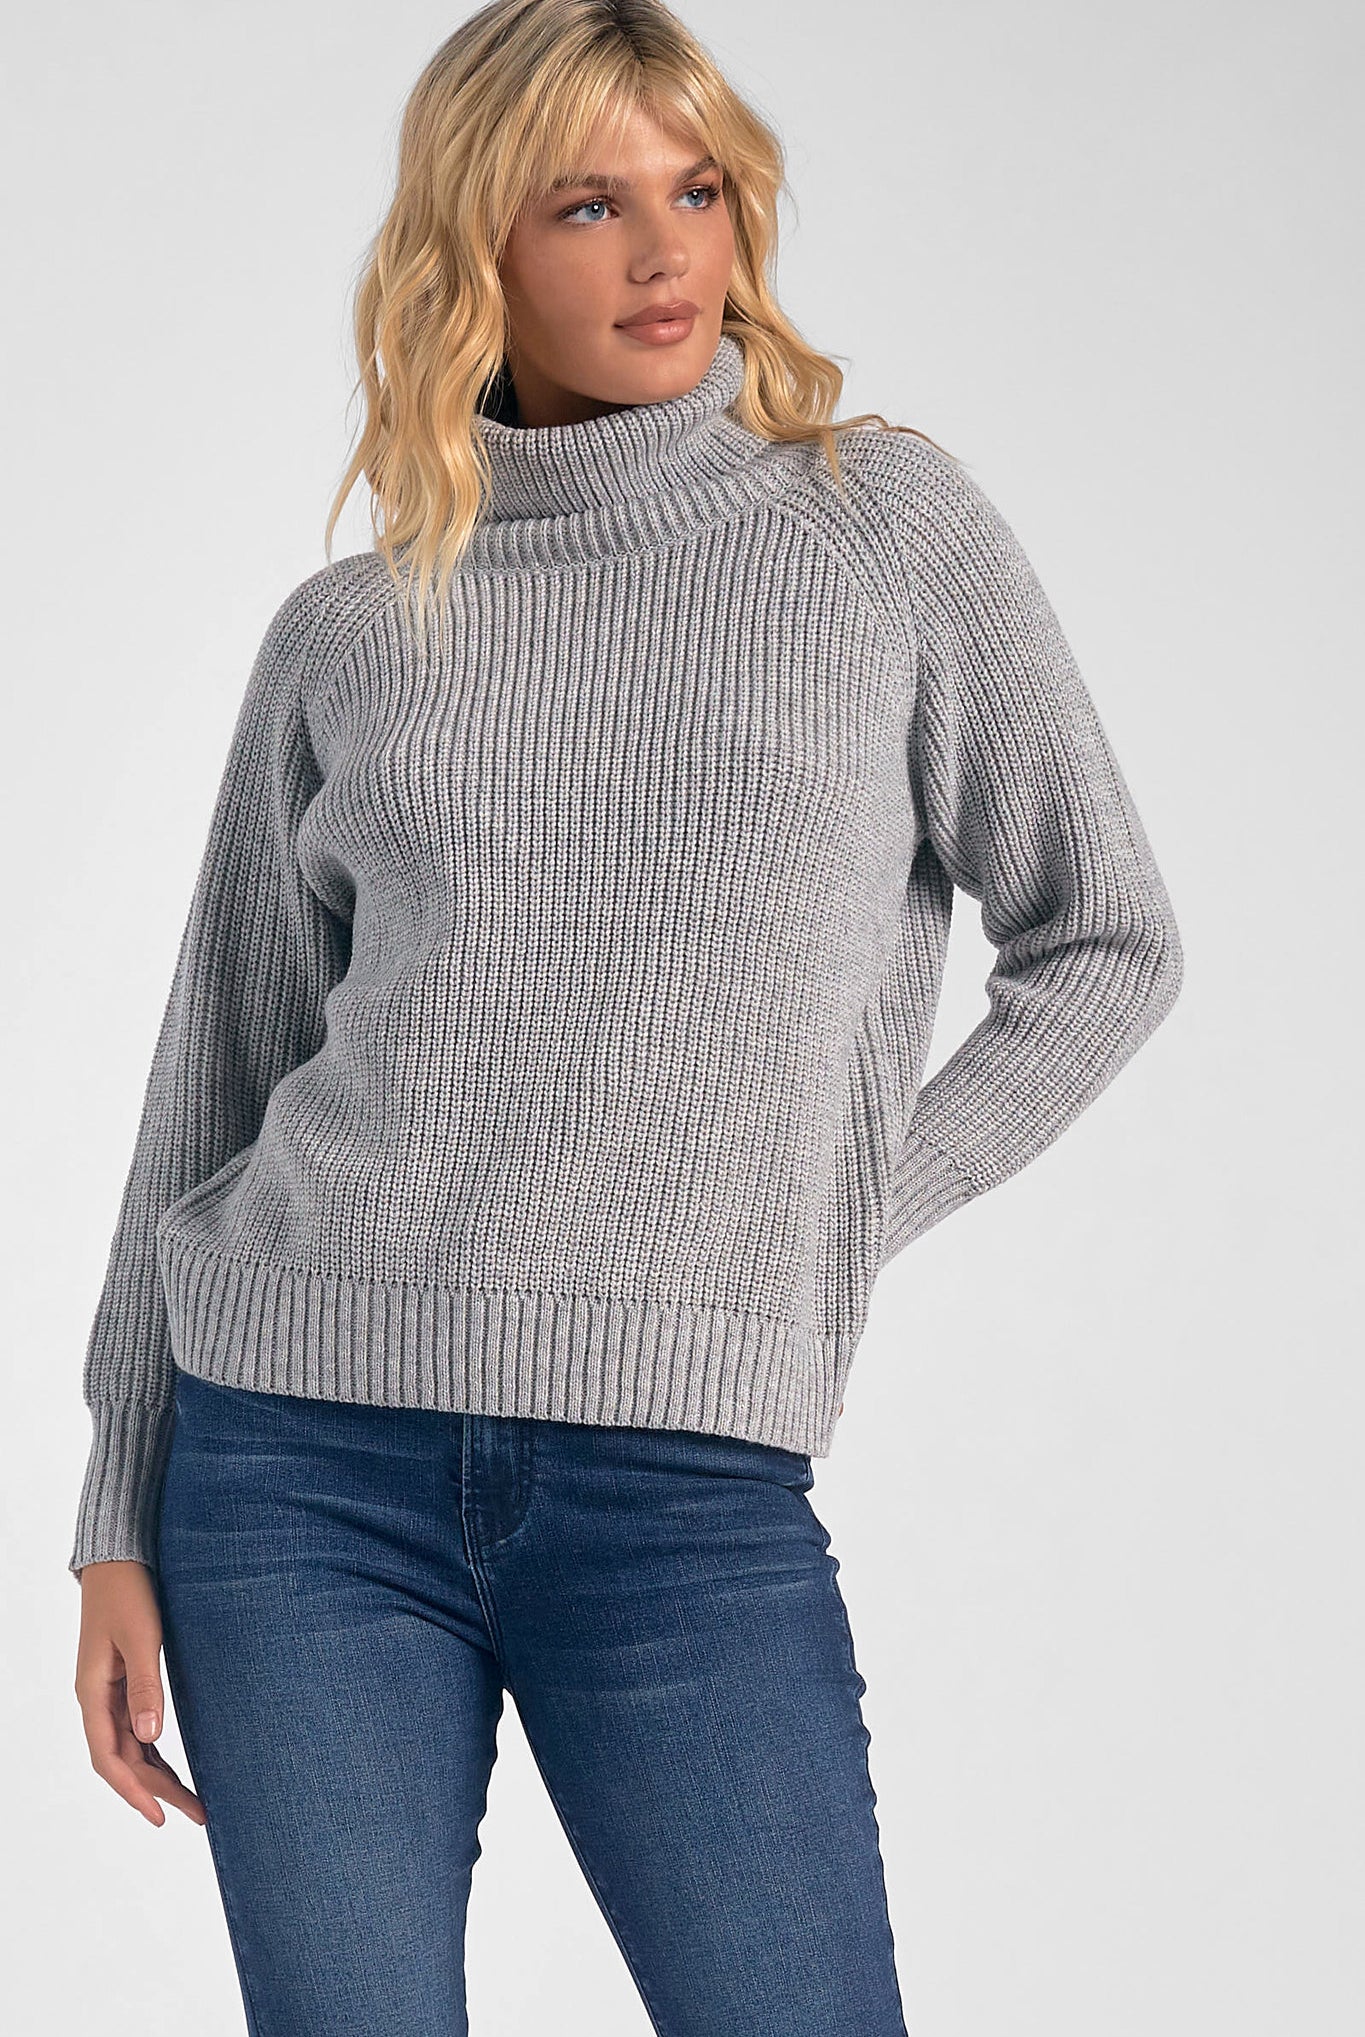 Around The Town Cutout Sweater-Sweaters-Vixen Collection, Day Spa and Women's Boutique Located in Seattle, Washington